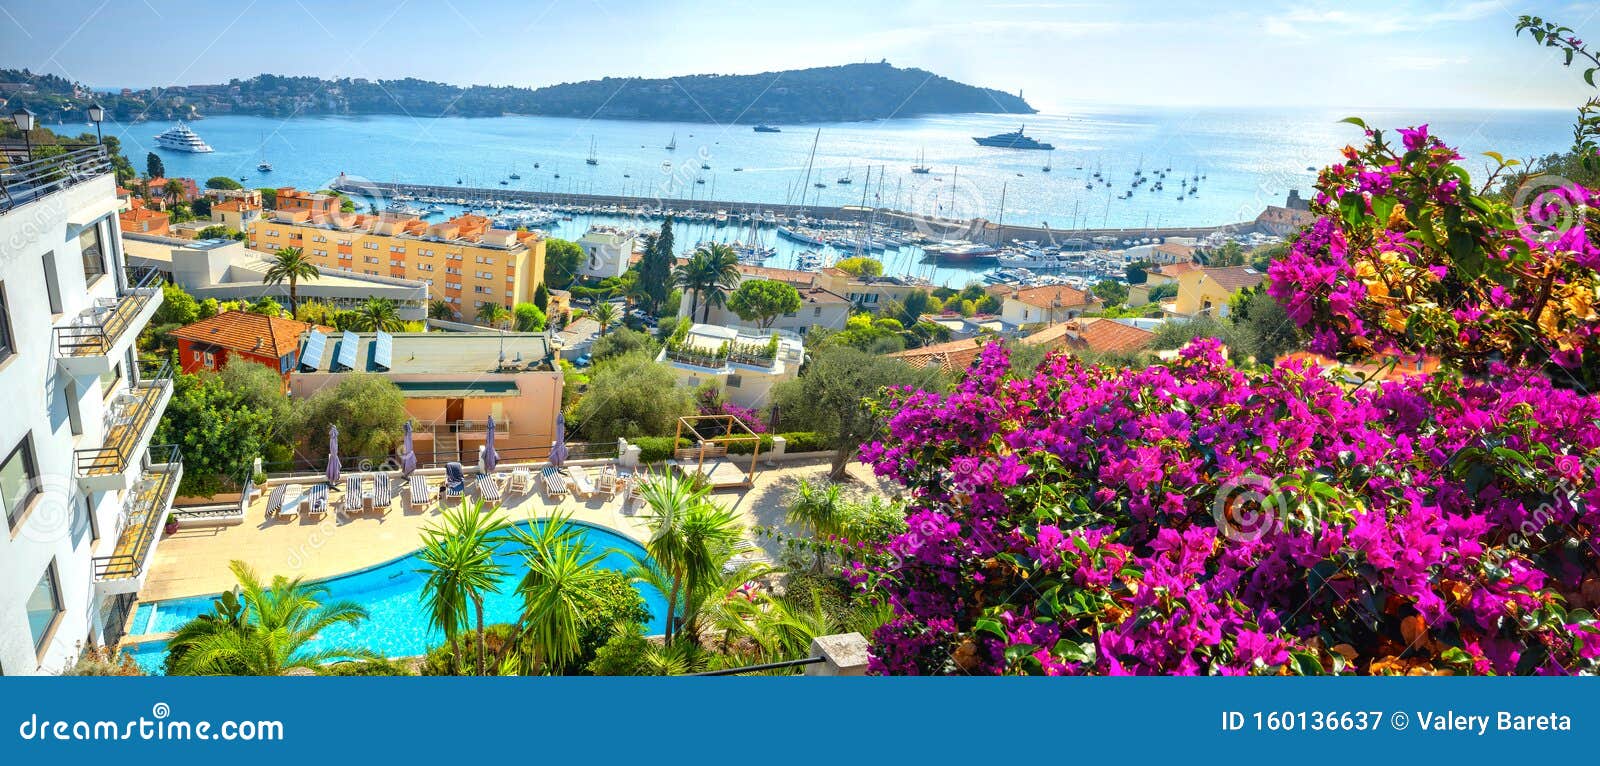 waterfront and resort town villefranche sur mer. french riviera, cote d`azur, france